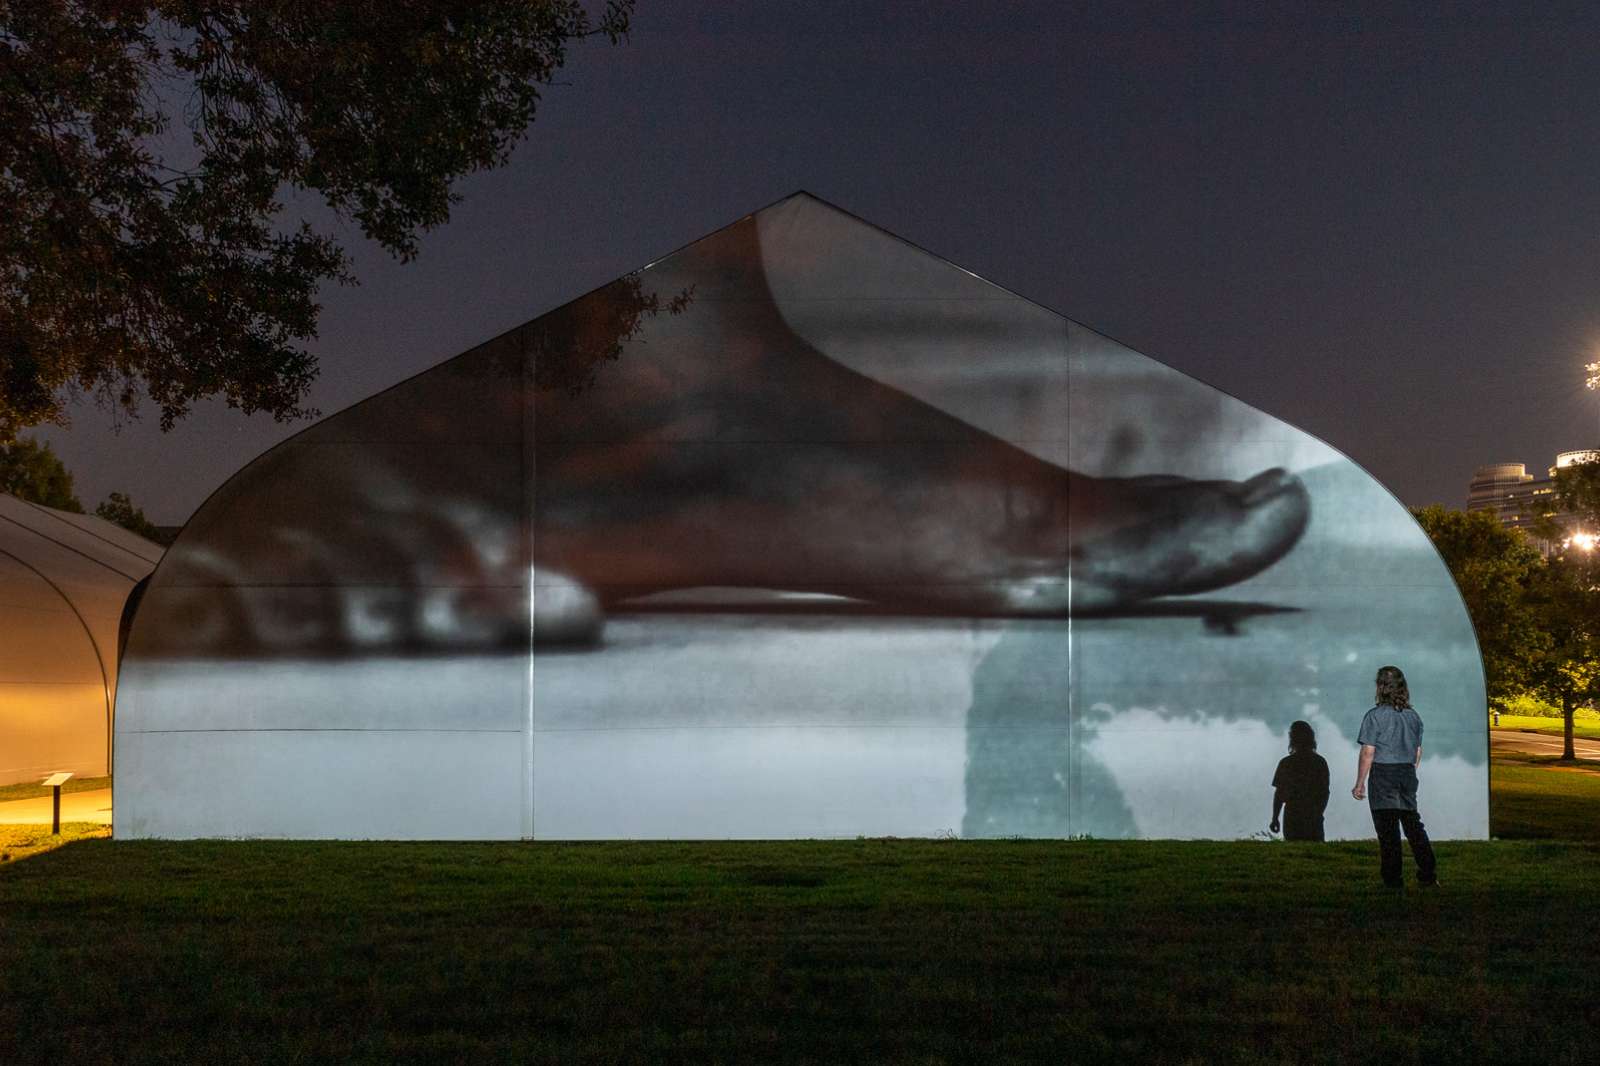 Image of Charisse Pearline Weston's video projection at night on the side of a tent, on Rice's campus